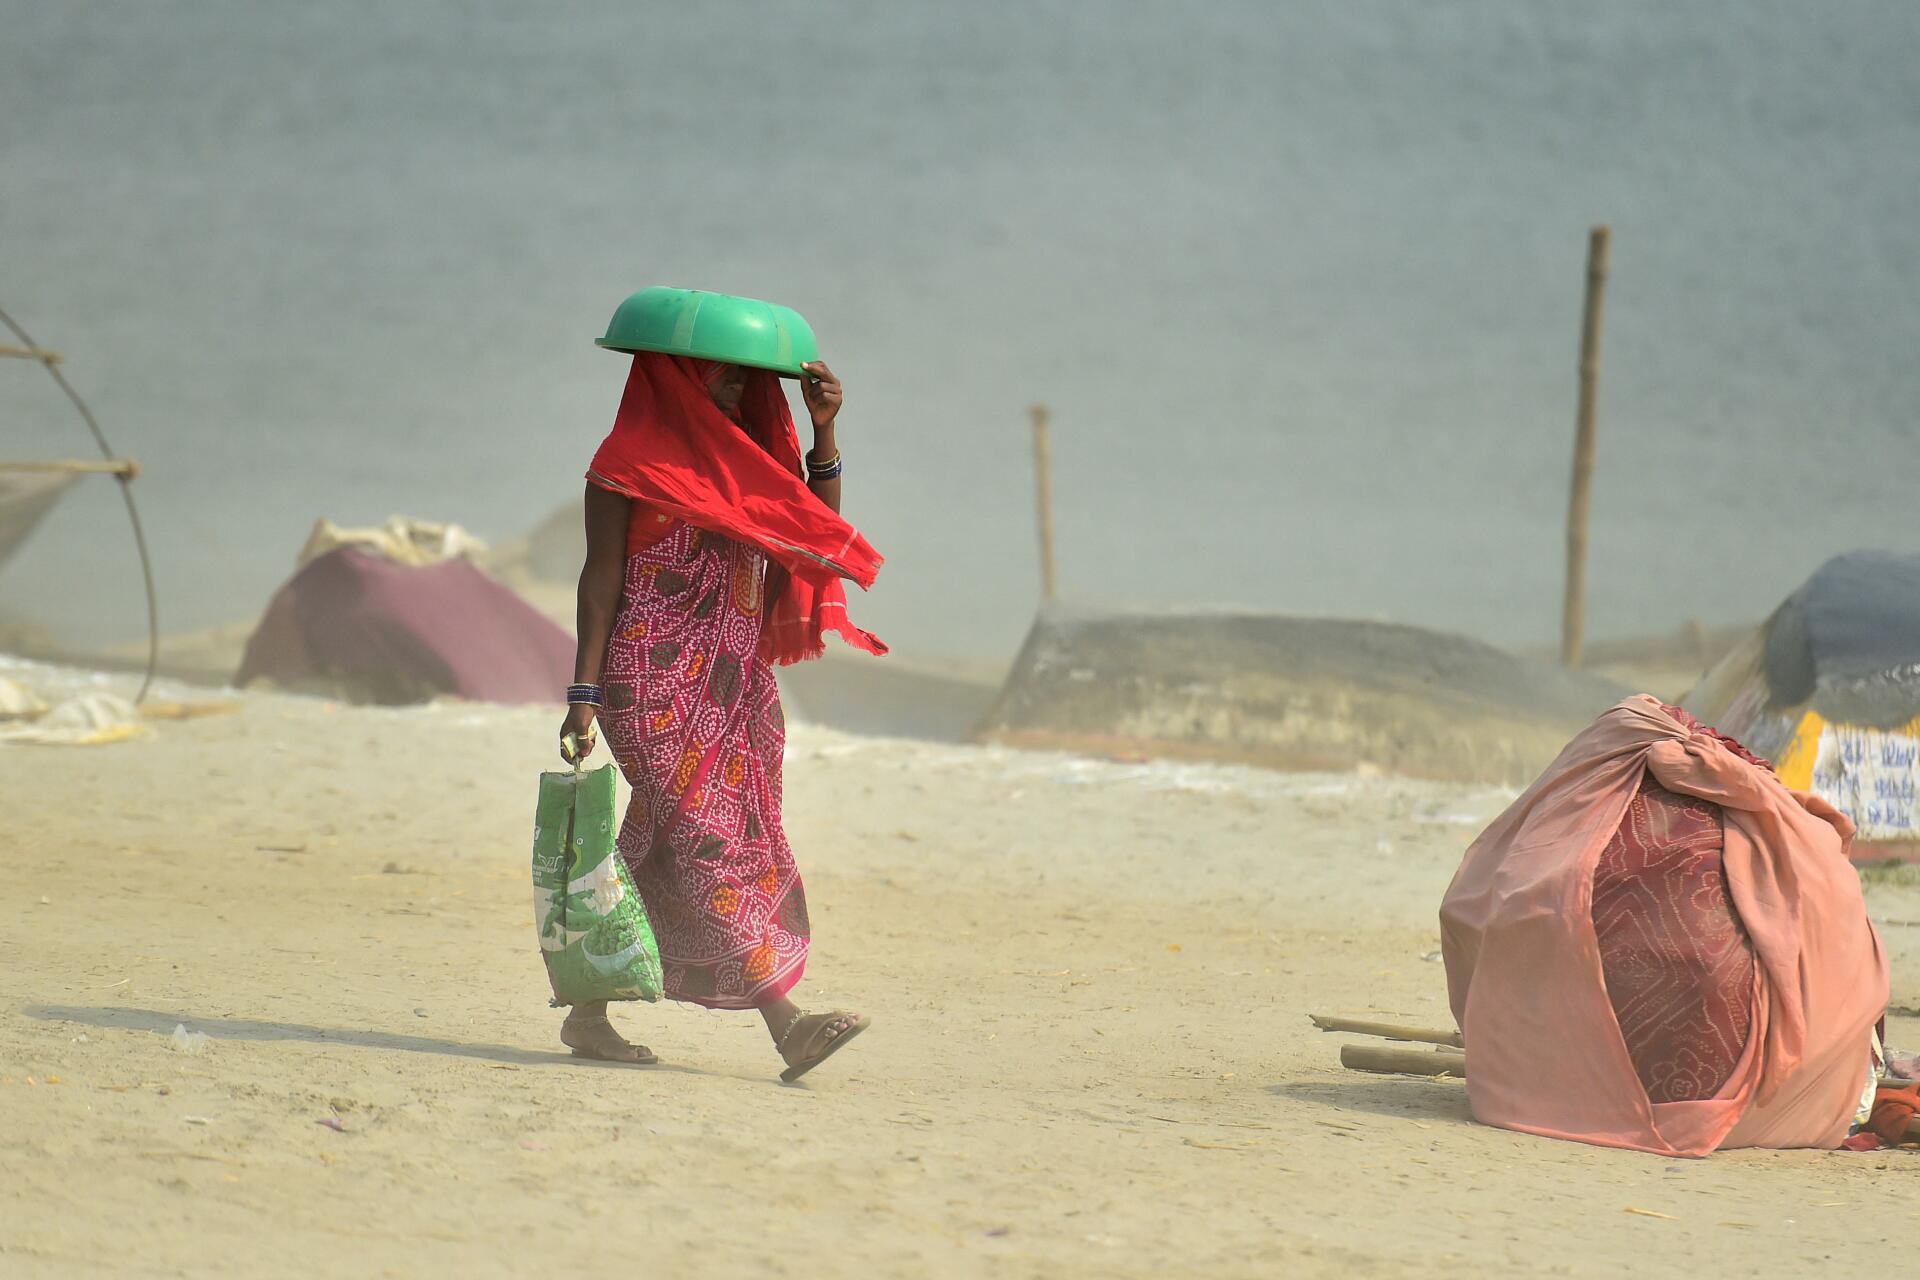 A woman covers her head with a plastic bowl as she walks in Allahabad on April 30, 2022 near Sangam, the confluence of the Ganges, Yamuna and mythical Saraswati rivers.